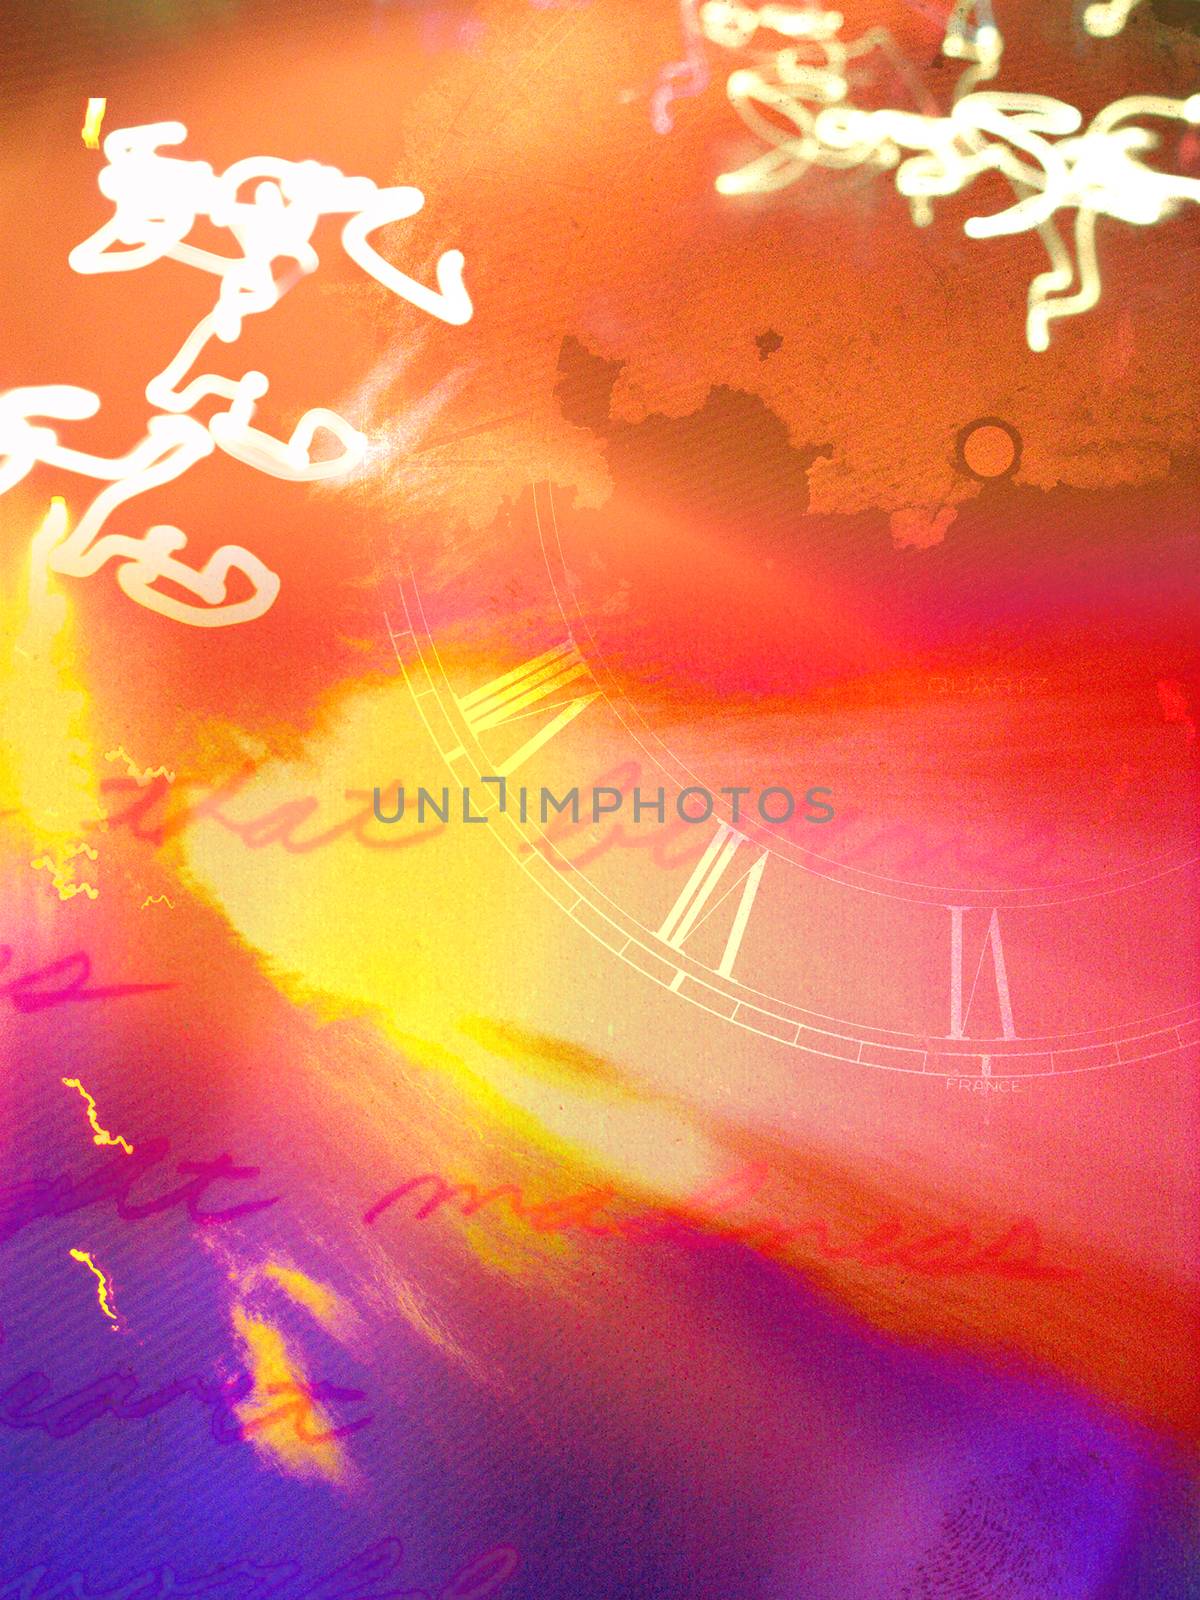 Abstract painting. Clock face with roman numbers, lines from poem and glowing swirls of light.